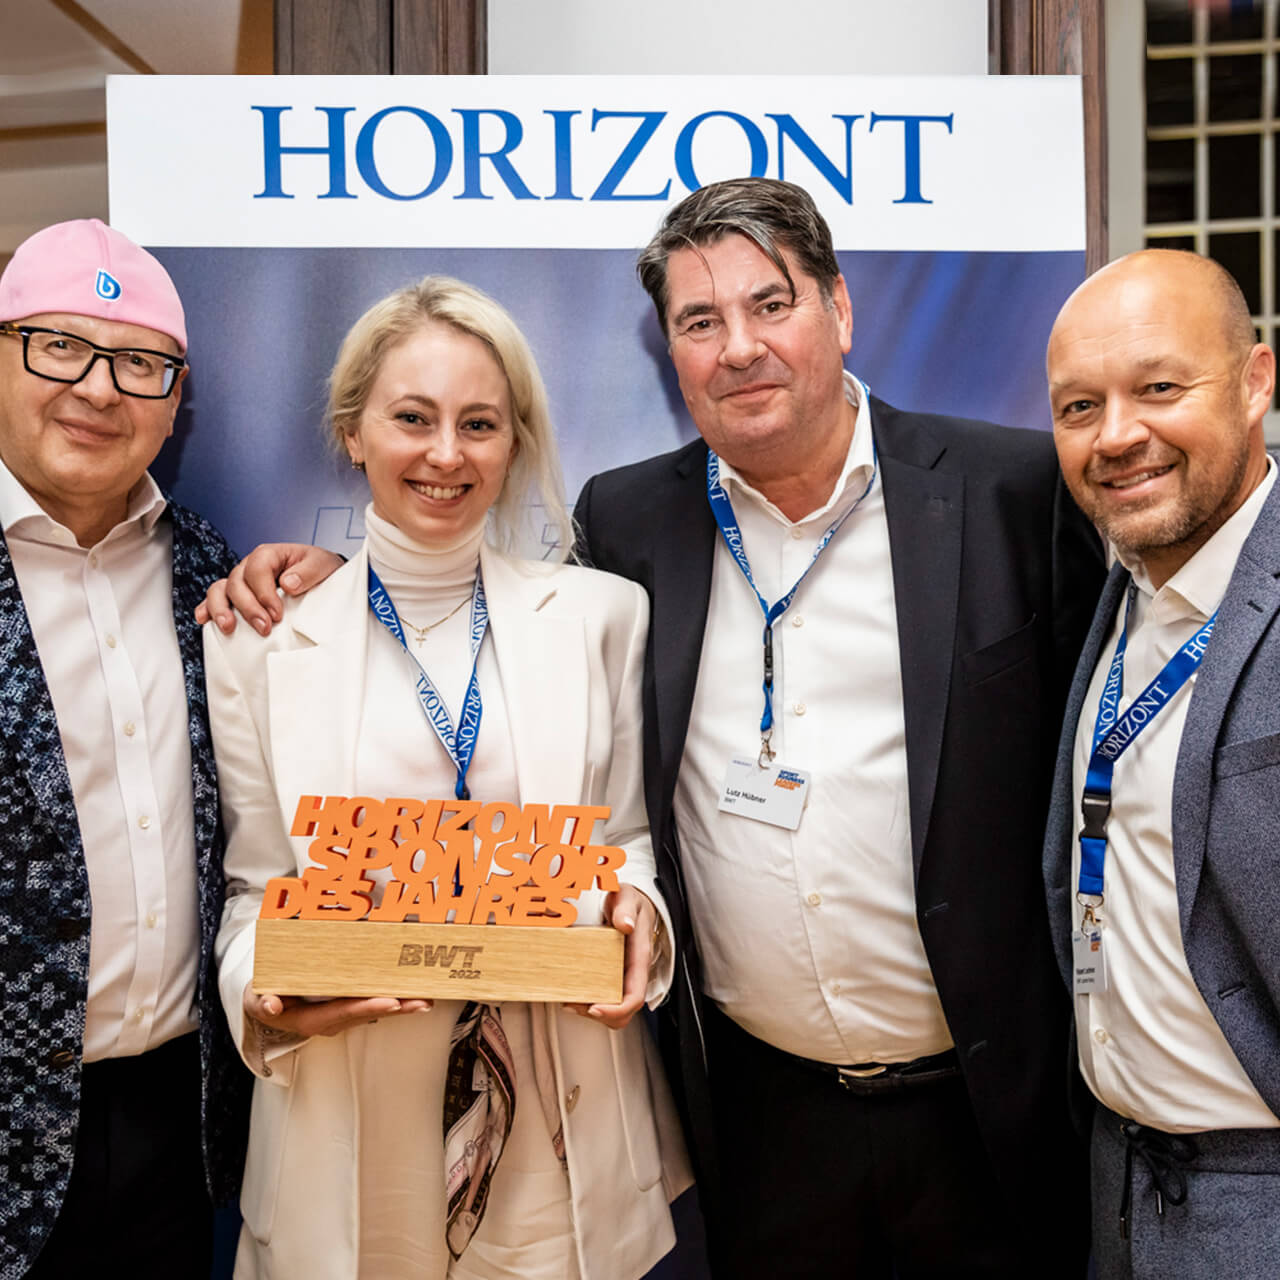 Horizont Sport Bus Lead For 2022